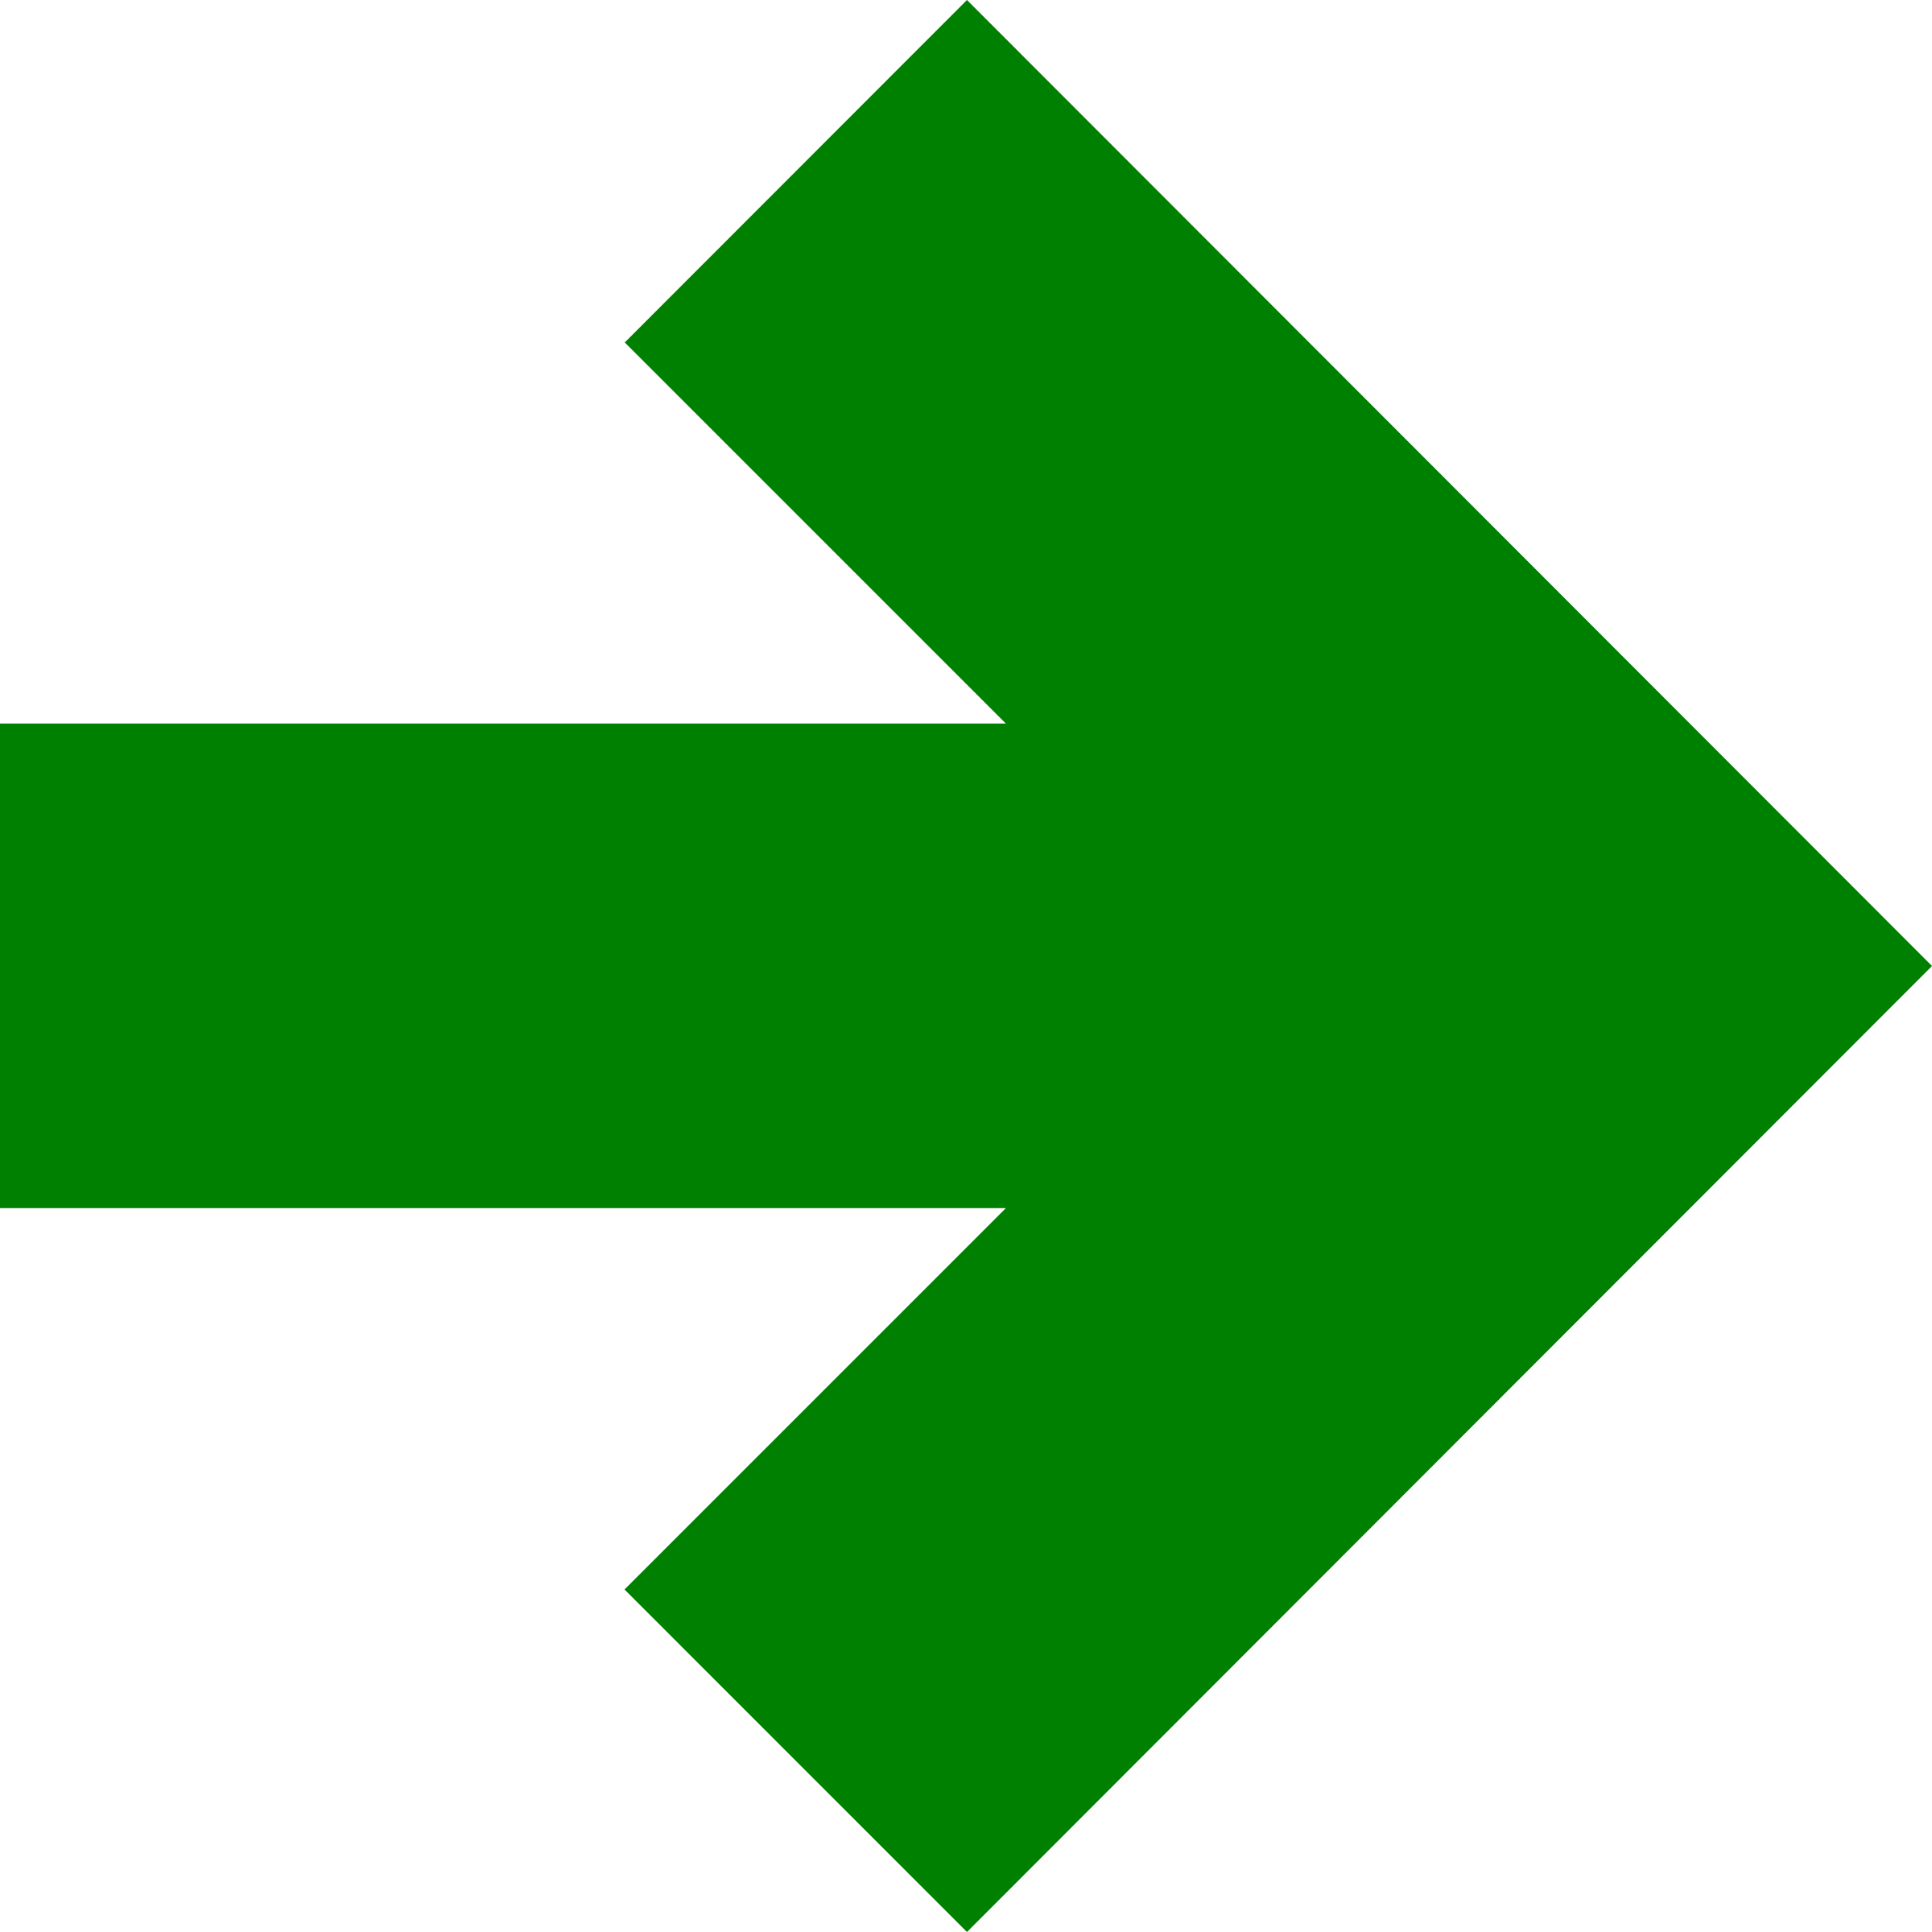 Clip Royalty Free Download Big Image Png - Green Arrow Pointing To The Right (2400x2400)